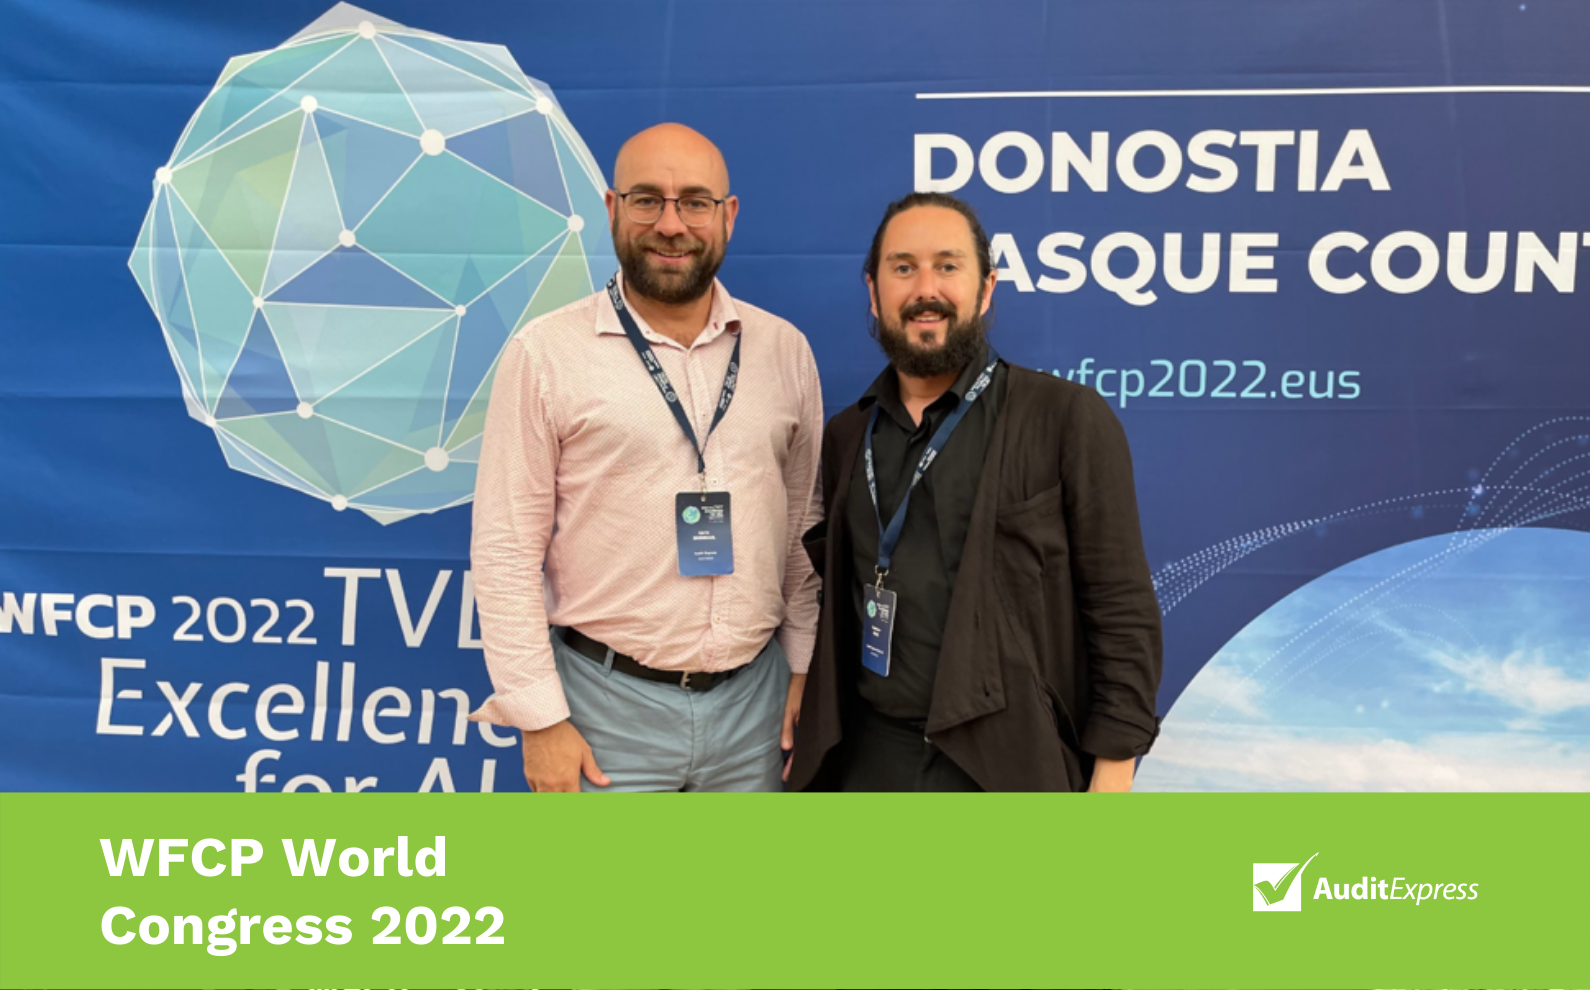 Kevin Ekendahl and Matthew Dale standing in front of WFCP banner with headline across bottom 'WFCP World Congress 2022' and the Audit Express logo